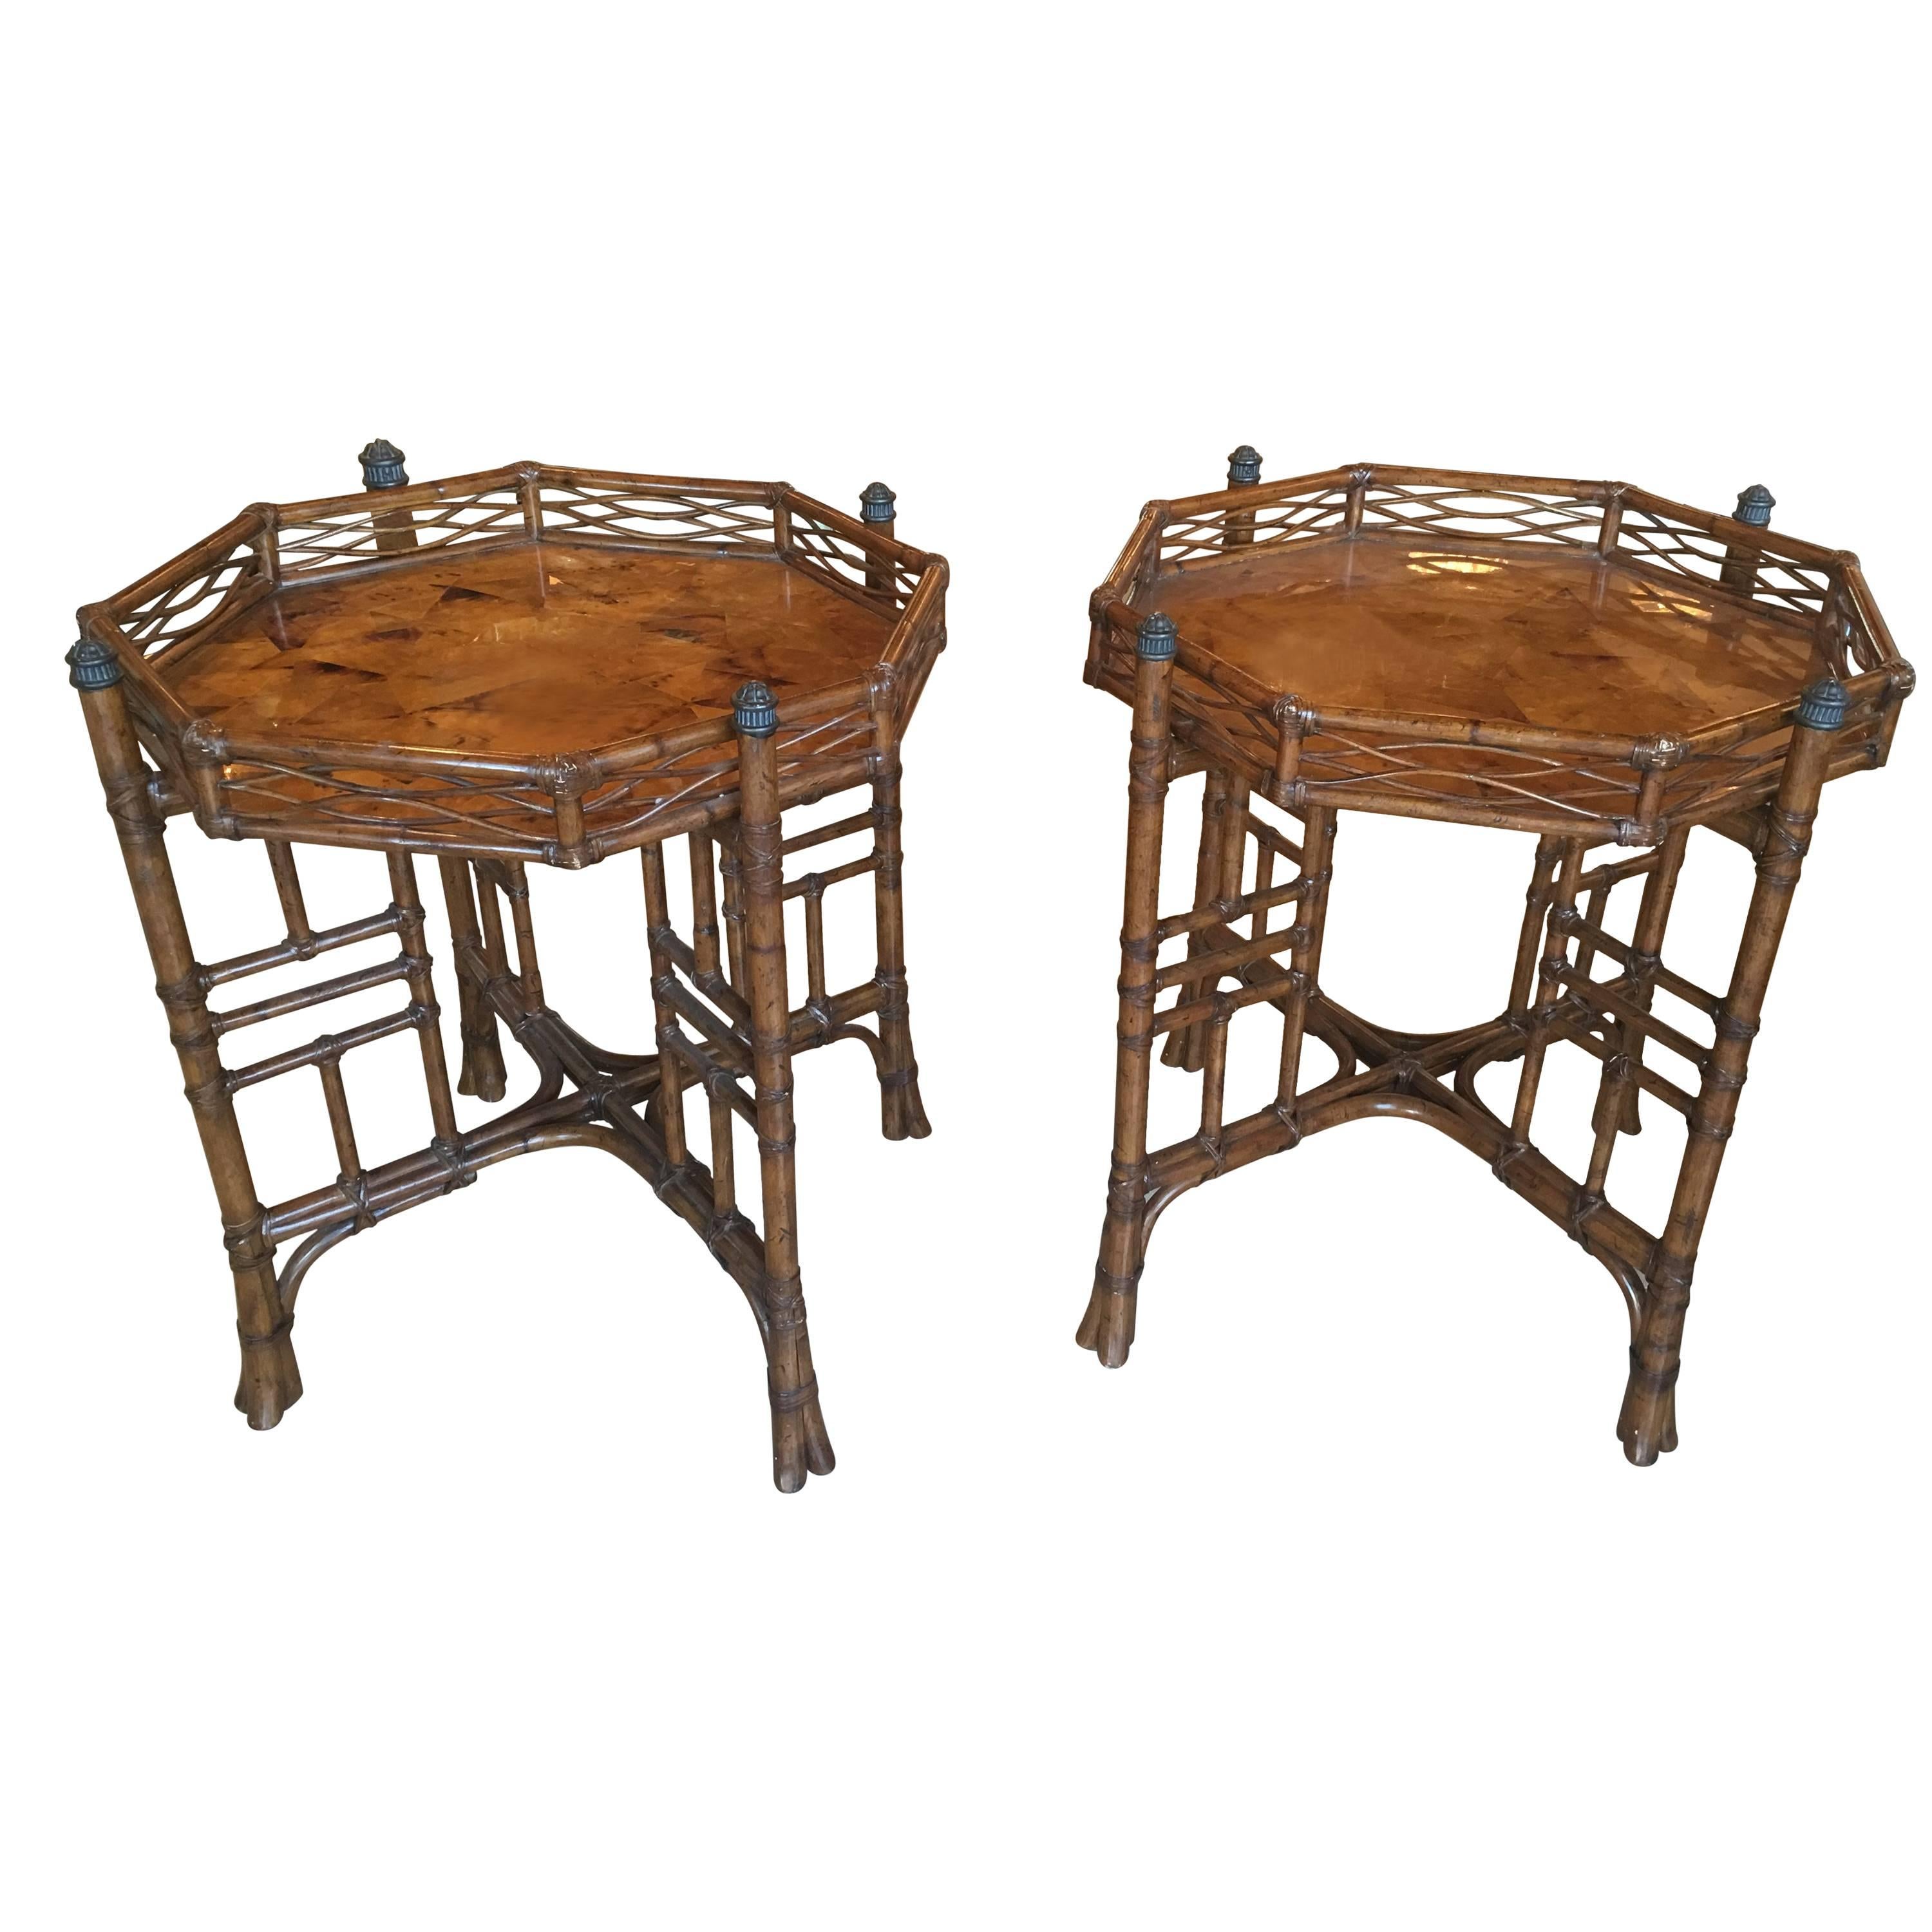 Pair of Rattan End Side Tables Octogonal Tortoise Bamboo Tropical Chinoiserie